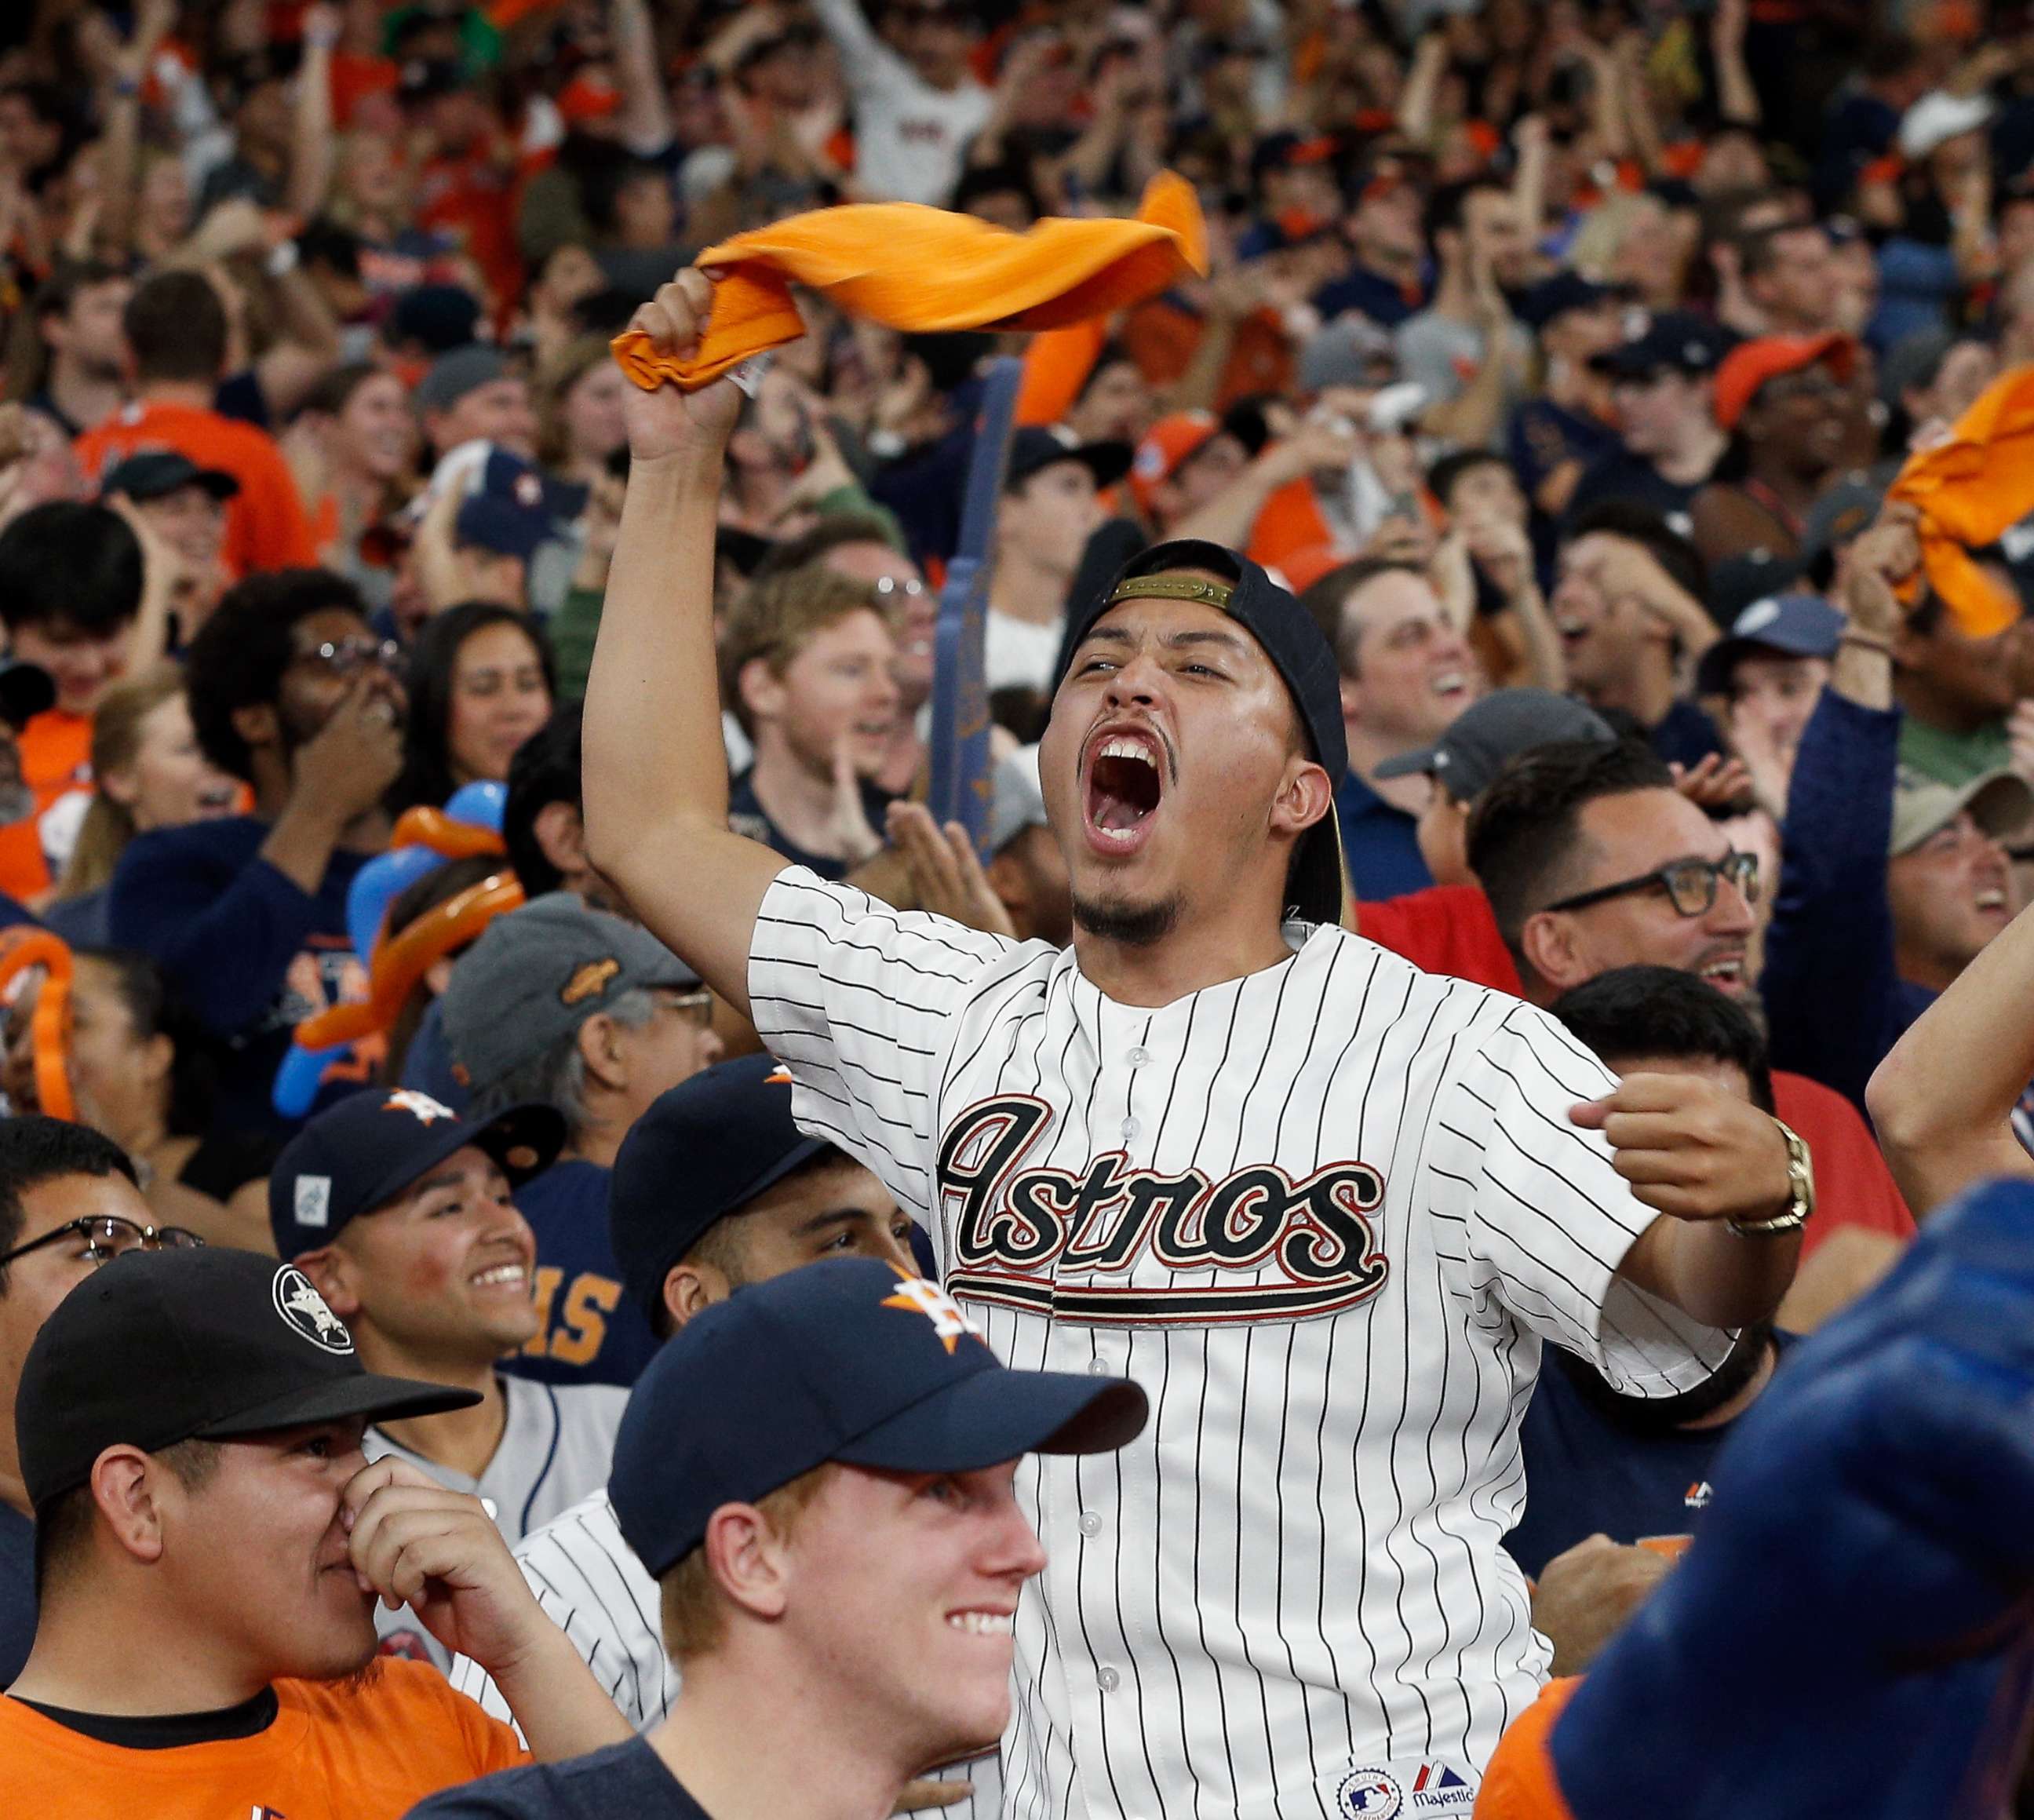 PHOTO: Fans cheer during the Houston Astros Game 7 World Series, Nov. 1, 2017, in Houston.